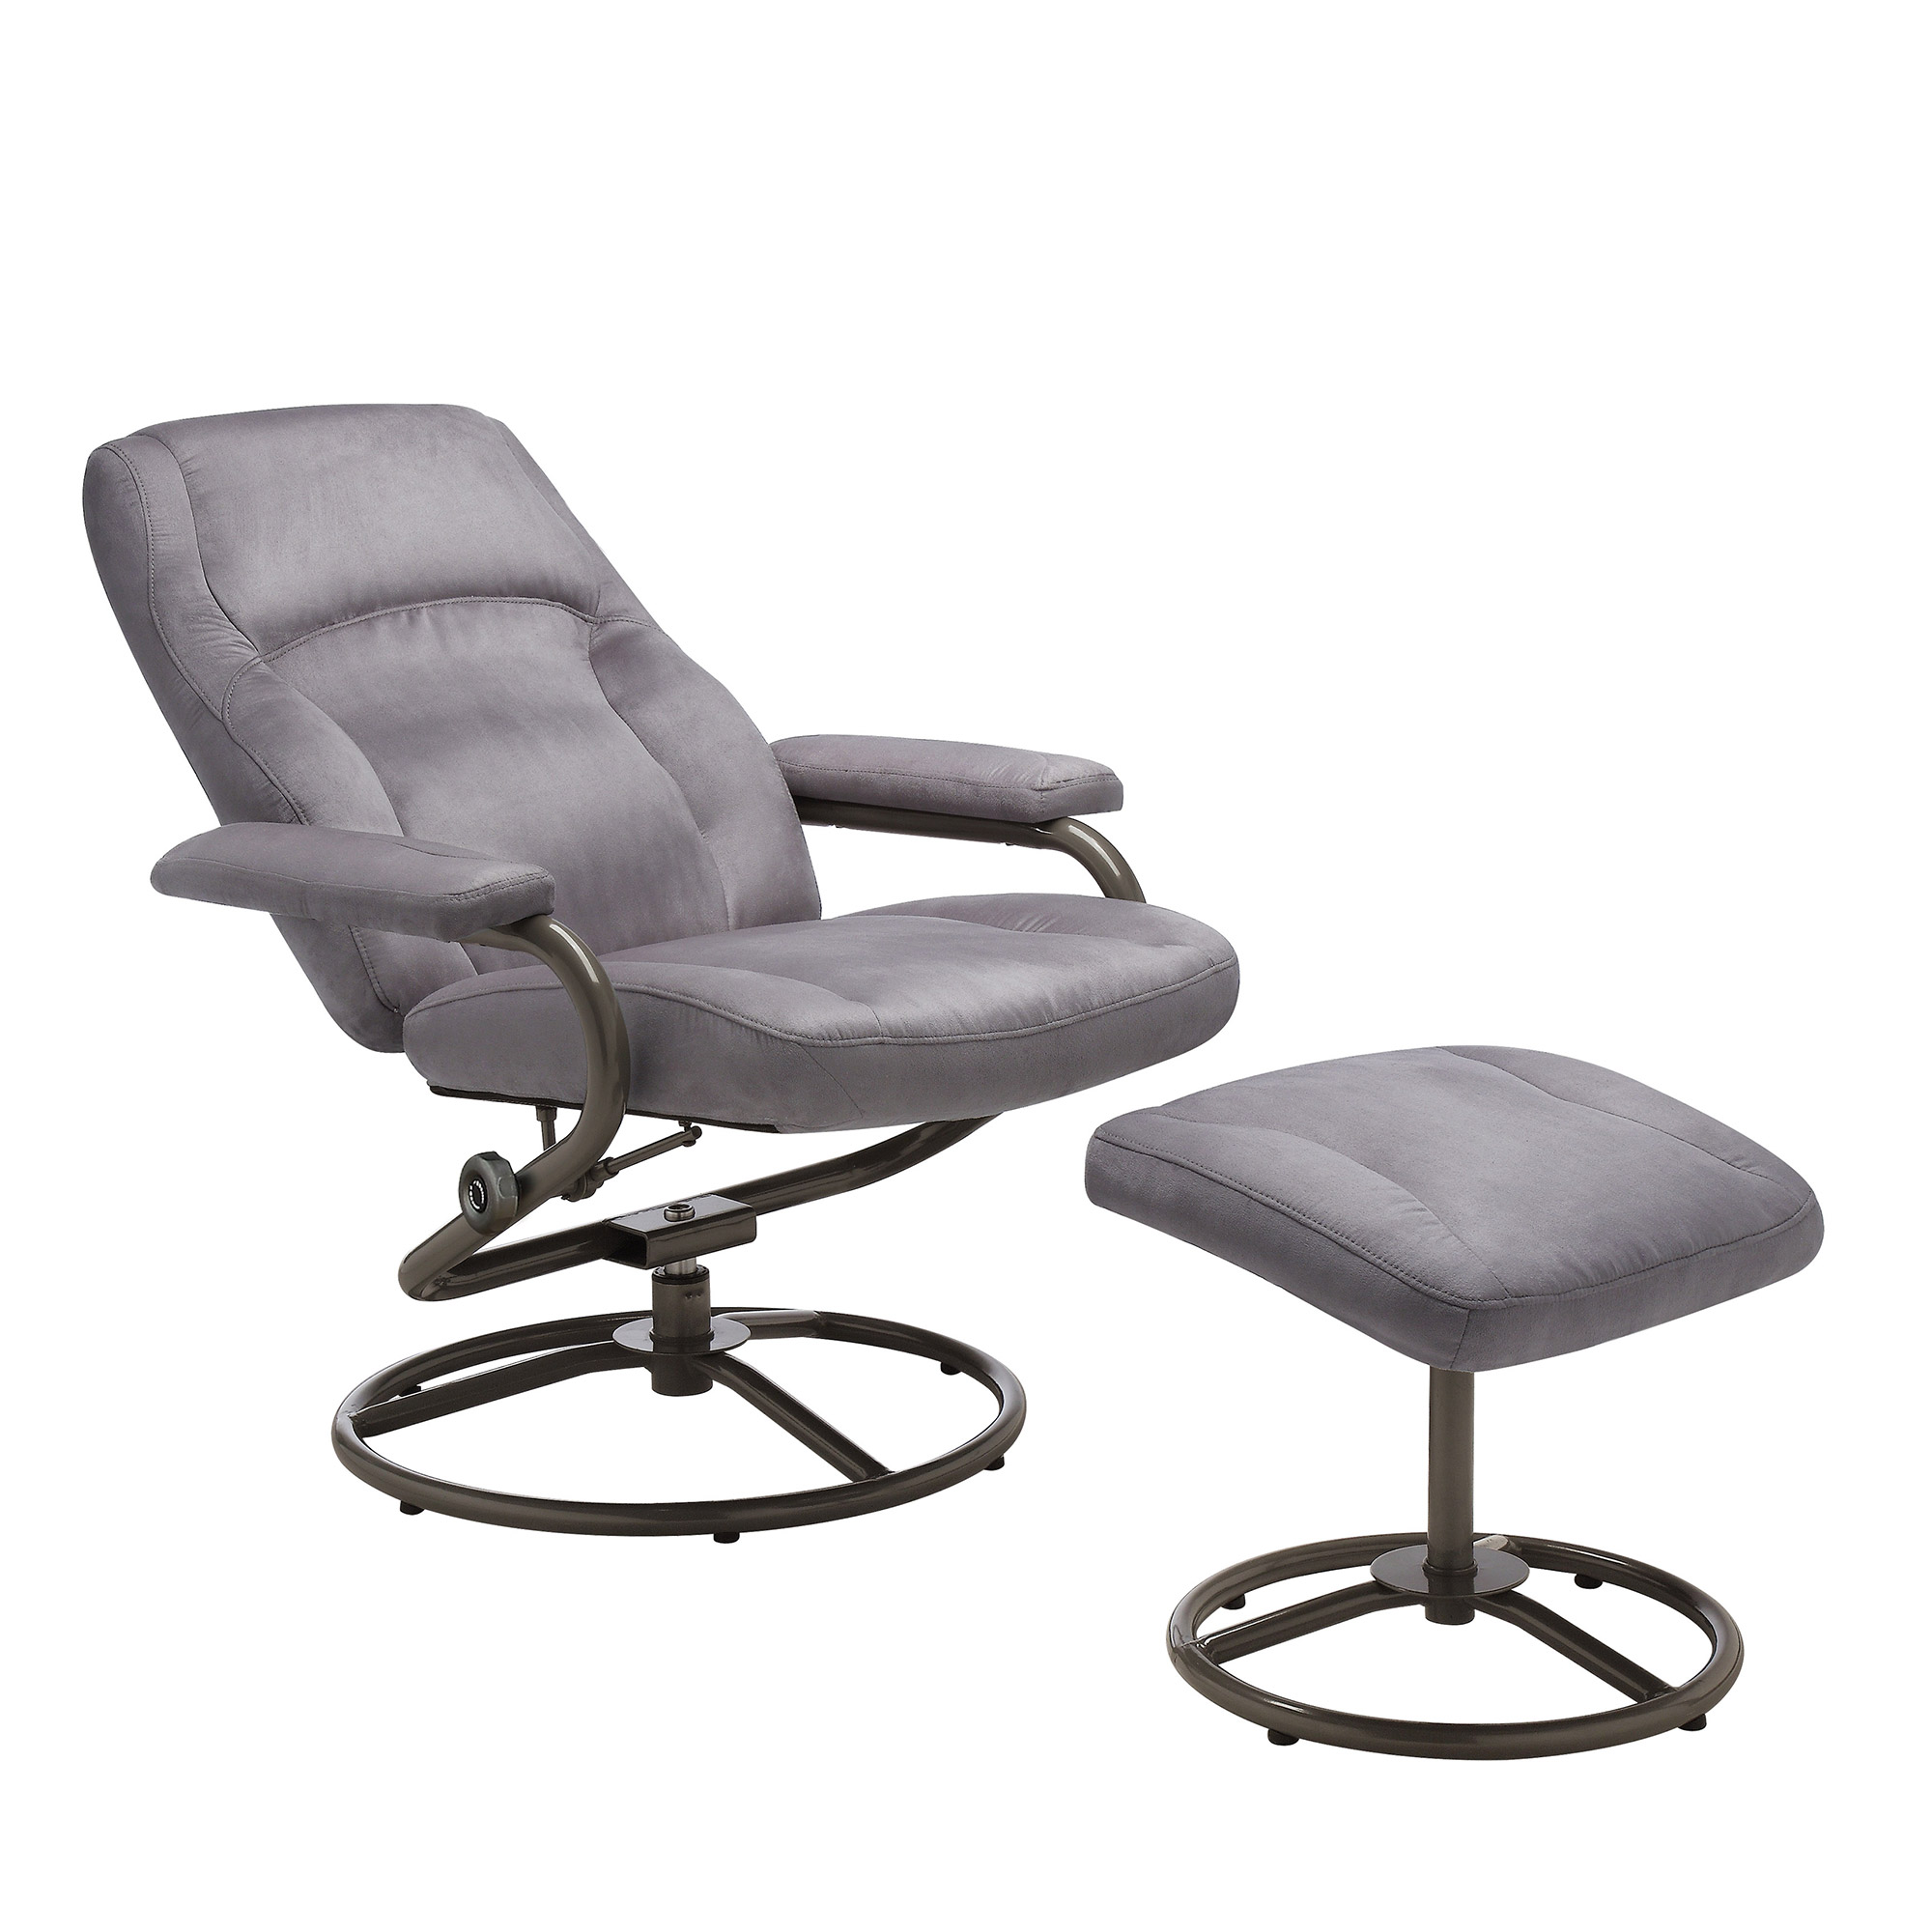 Mainstays Plush Pillowed Recliner Swivel Chair and Ottoman Set, in Gray - image 4 of 4